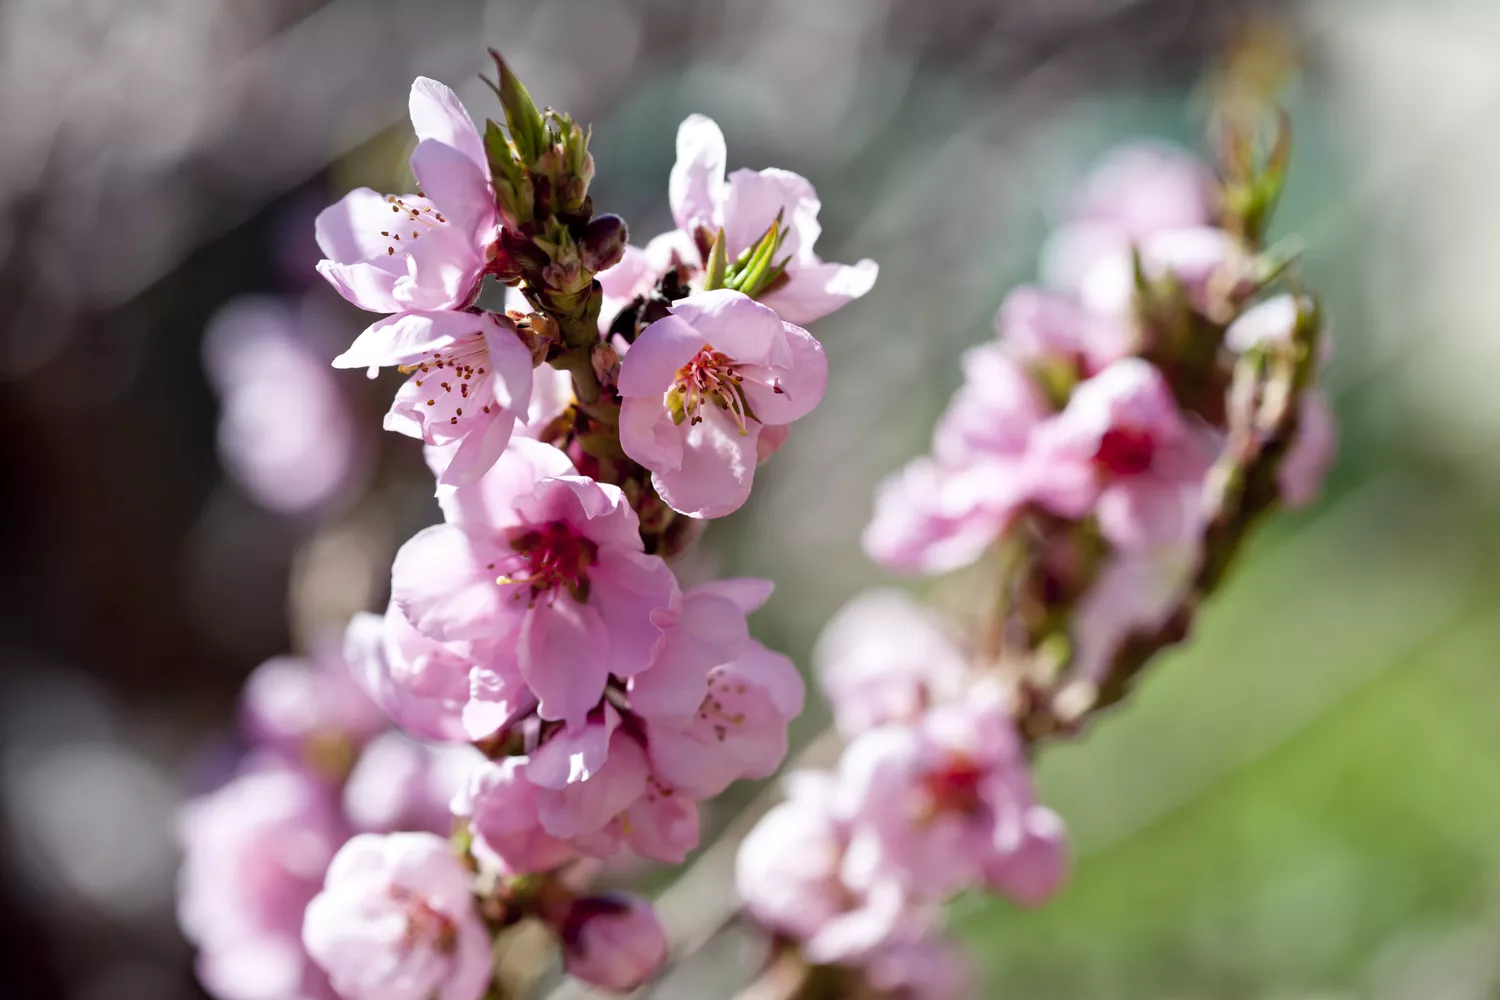 Close-up view of flowers on a dwarf peach tree in spring.